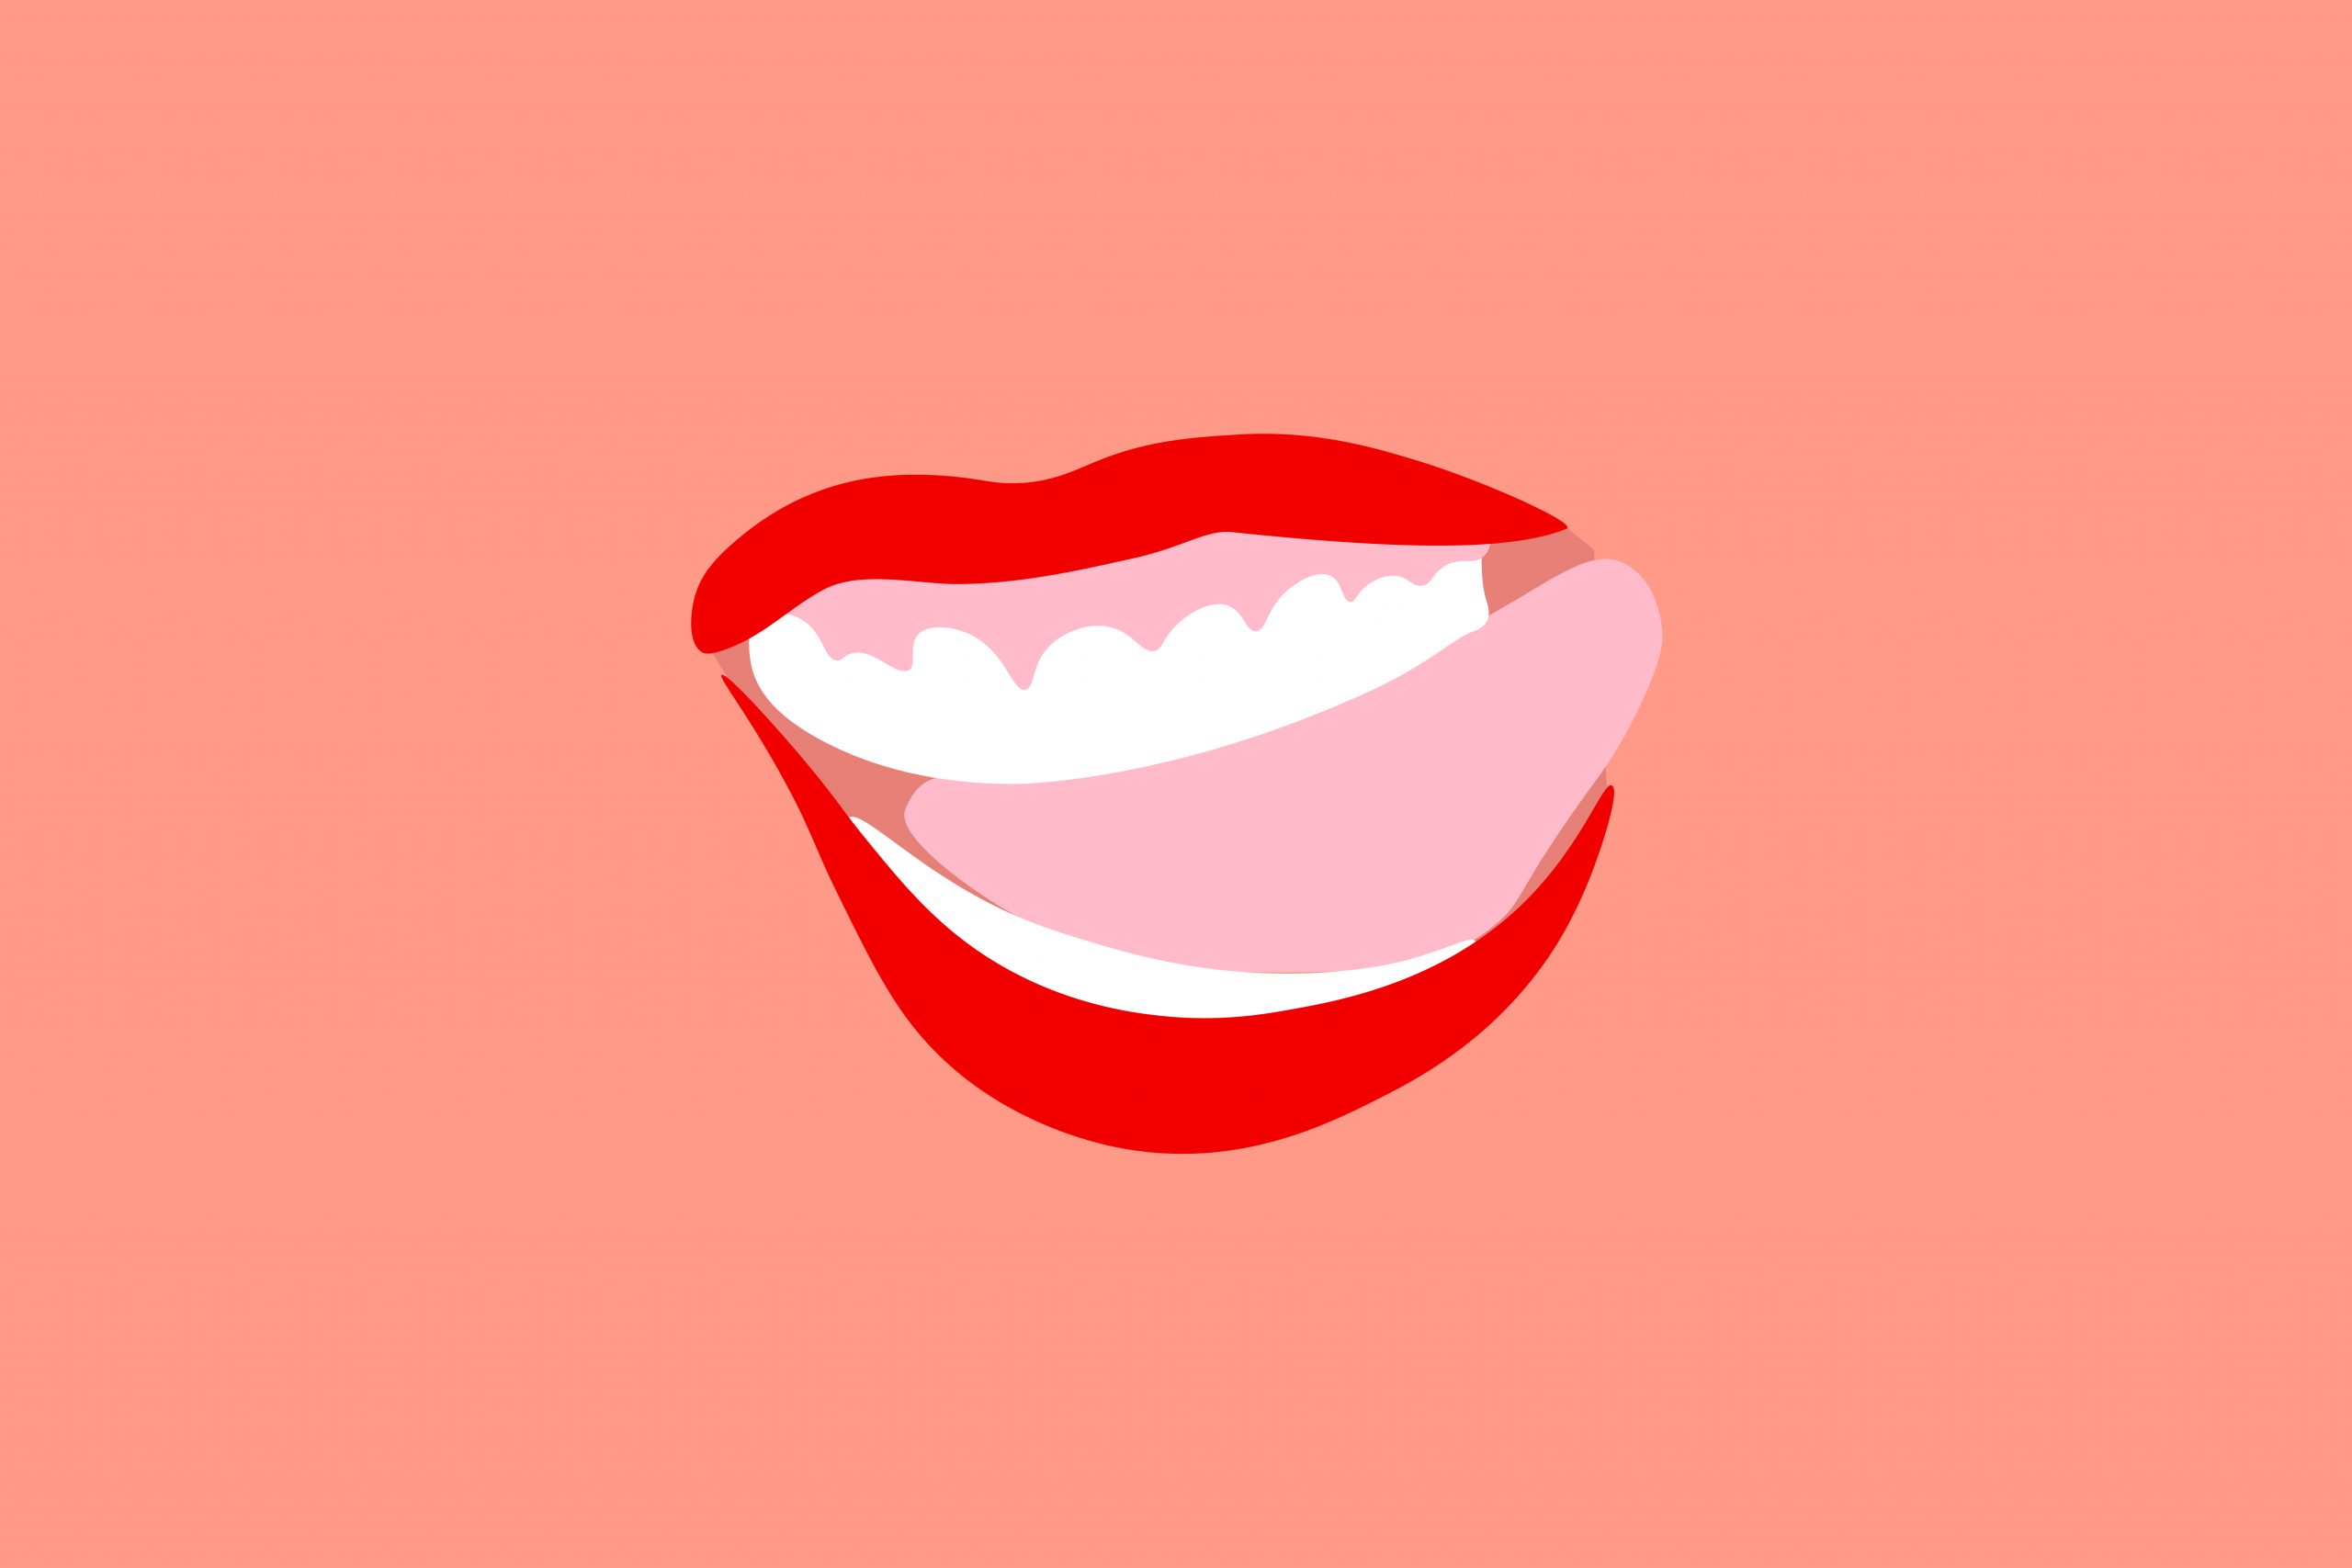 Illustration of the mouth of Miley Cyrus